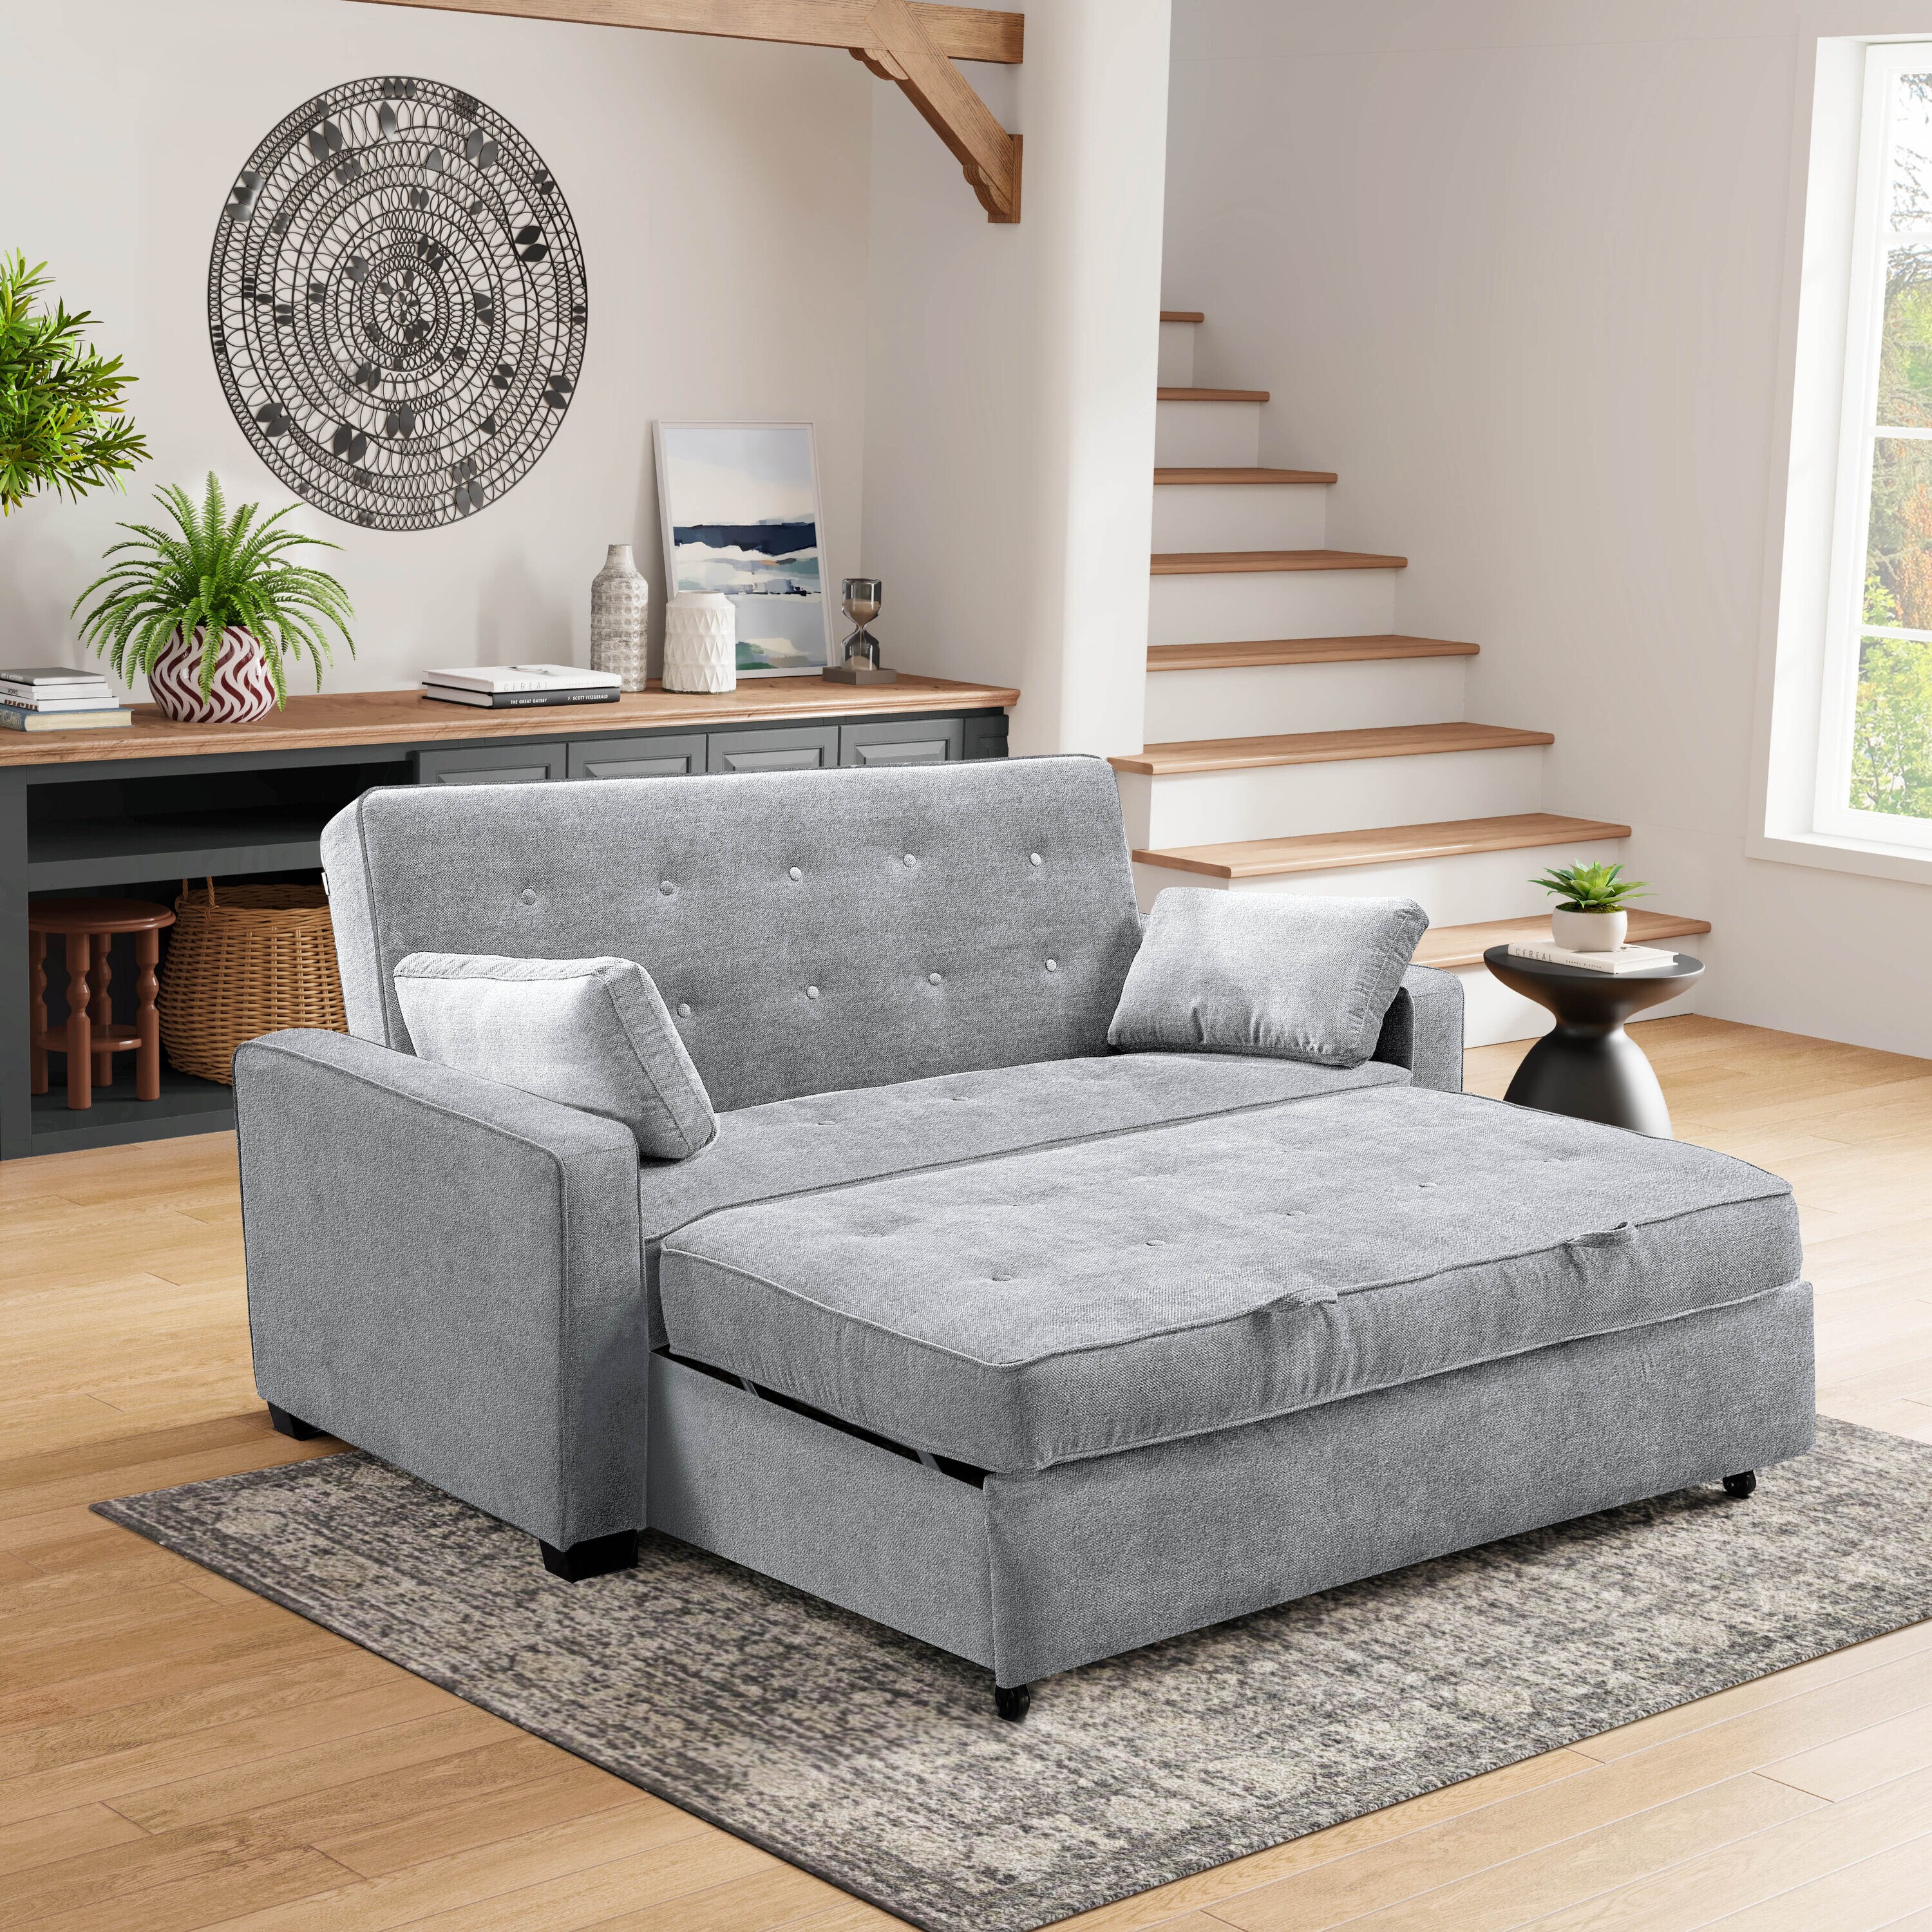 & department the Serta Sofas Arya in 2-seater Loveseats Sofa Light Couches, Grey Polyester/Blend Modern 66.5-in at